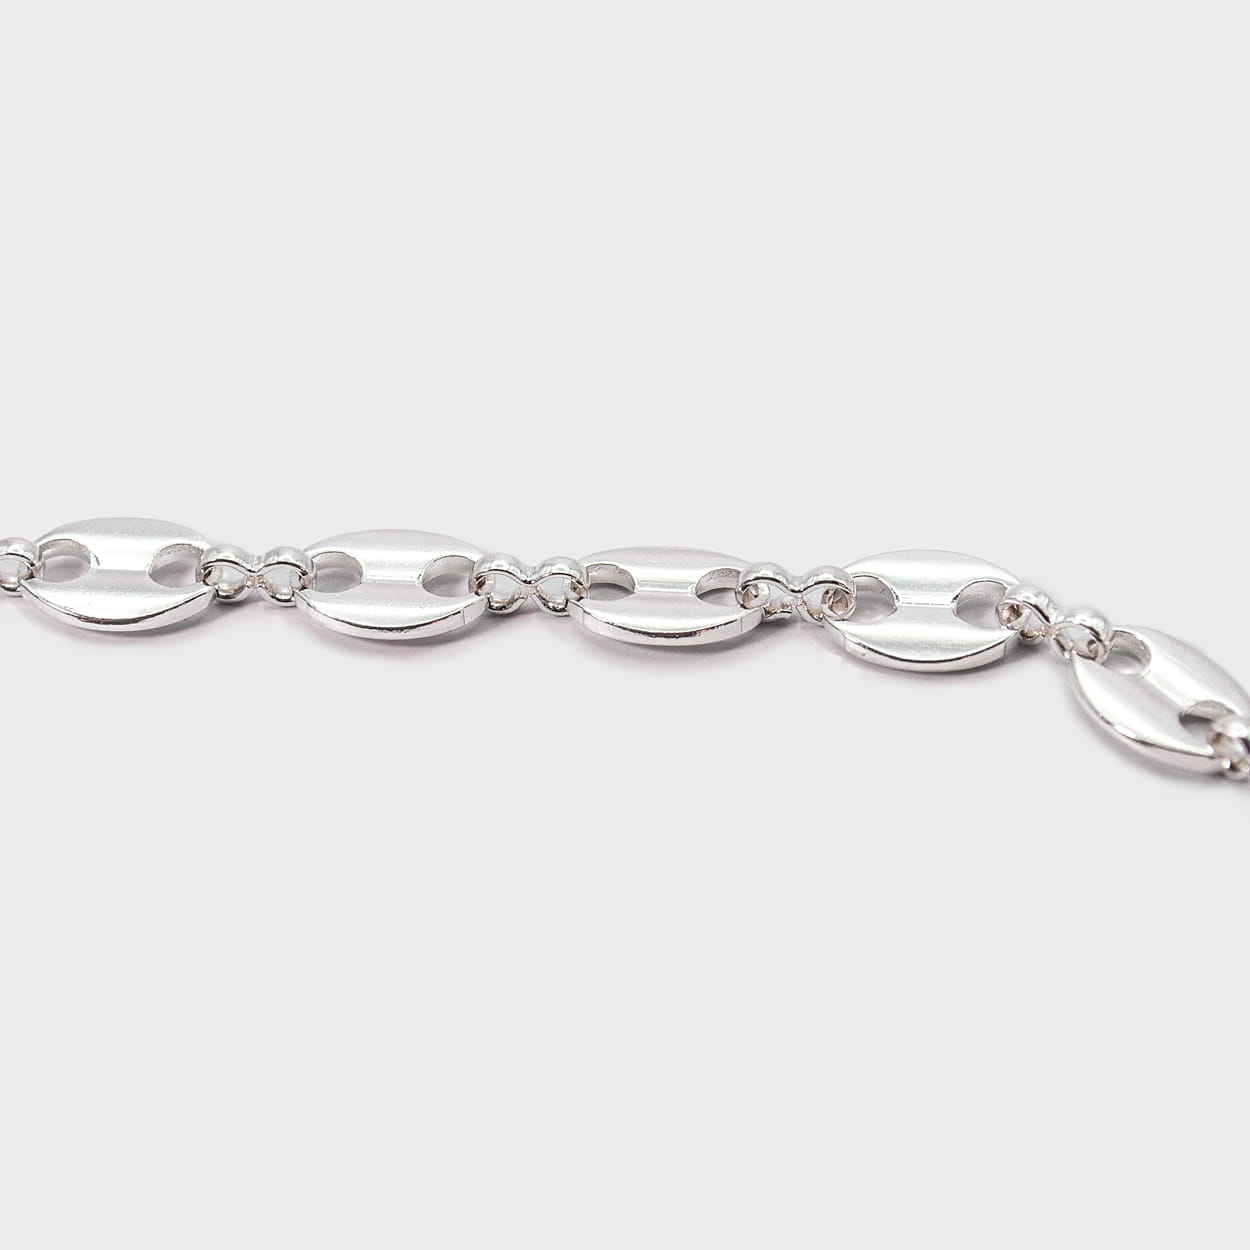 Atelier Domingo's La Mar bracelet is the classic coffee beans chain. It is made in Spain and this jewelry is made for both men and women. This unisex bracelet is made of a high-quality 925 Sterling silver plating.